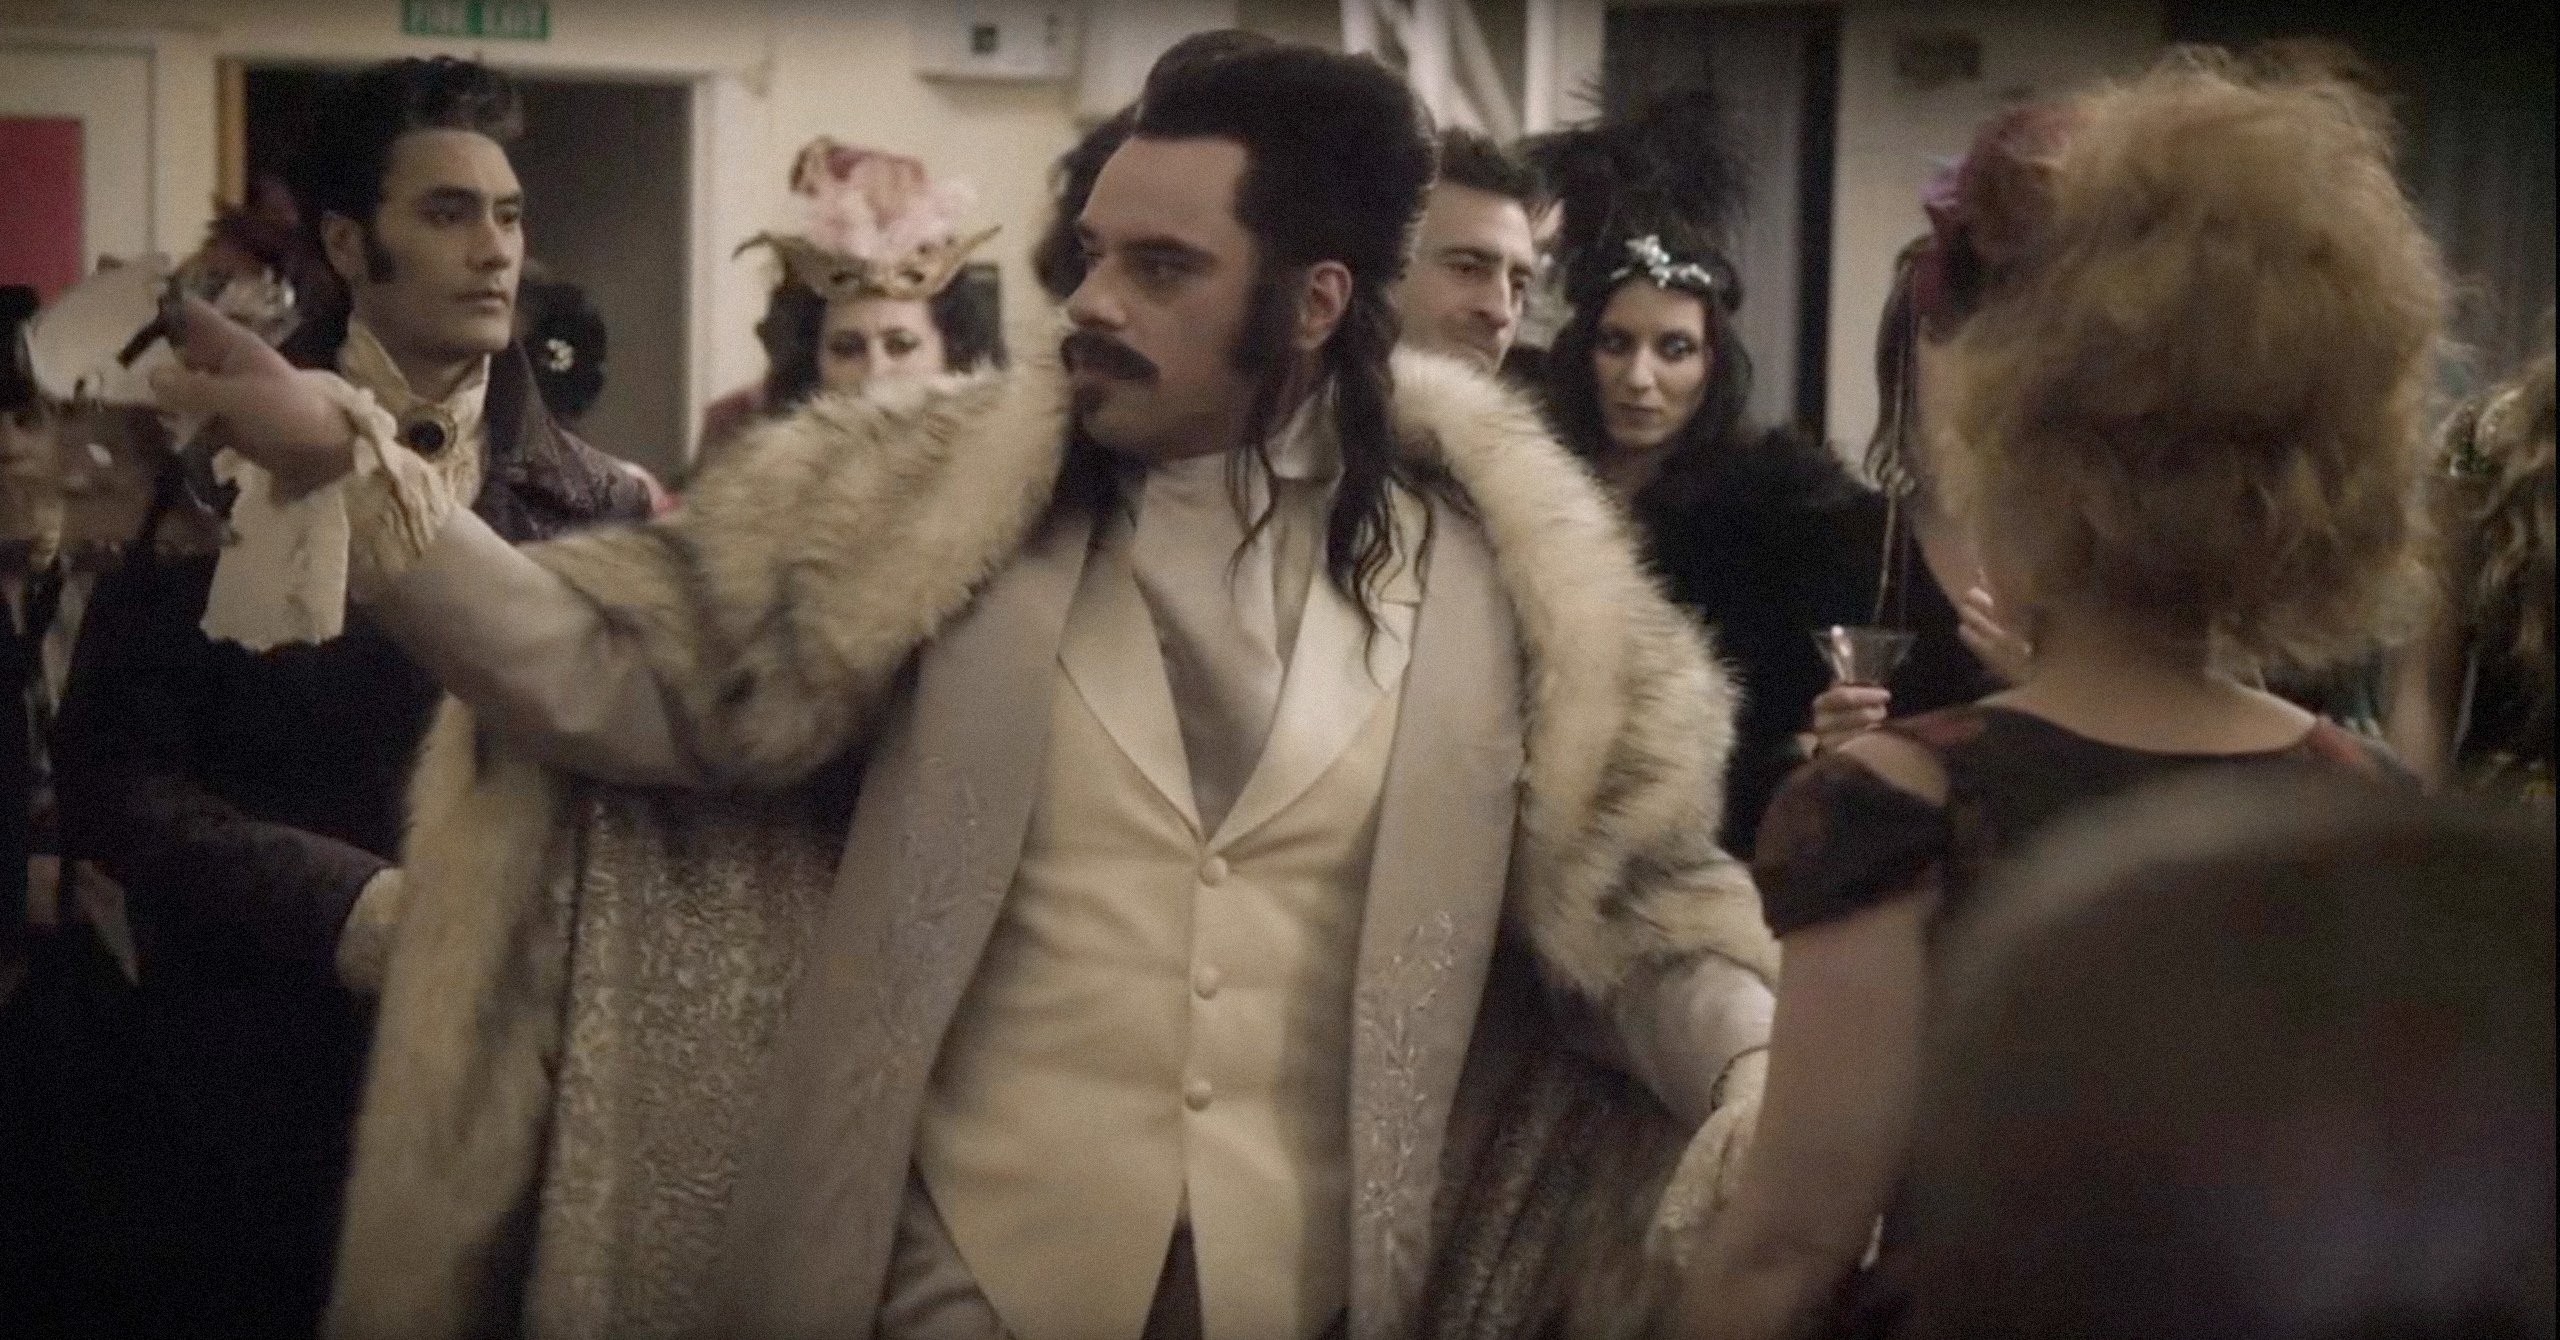 Actor in period costume with a white vest and fur coat at a masquerade party scene